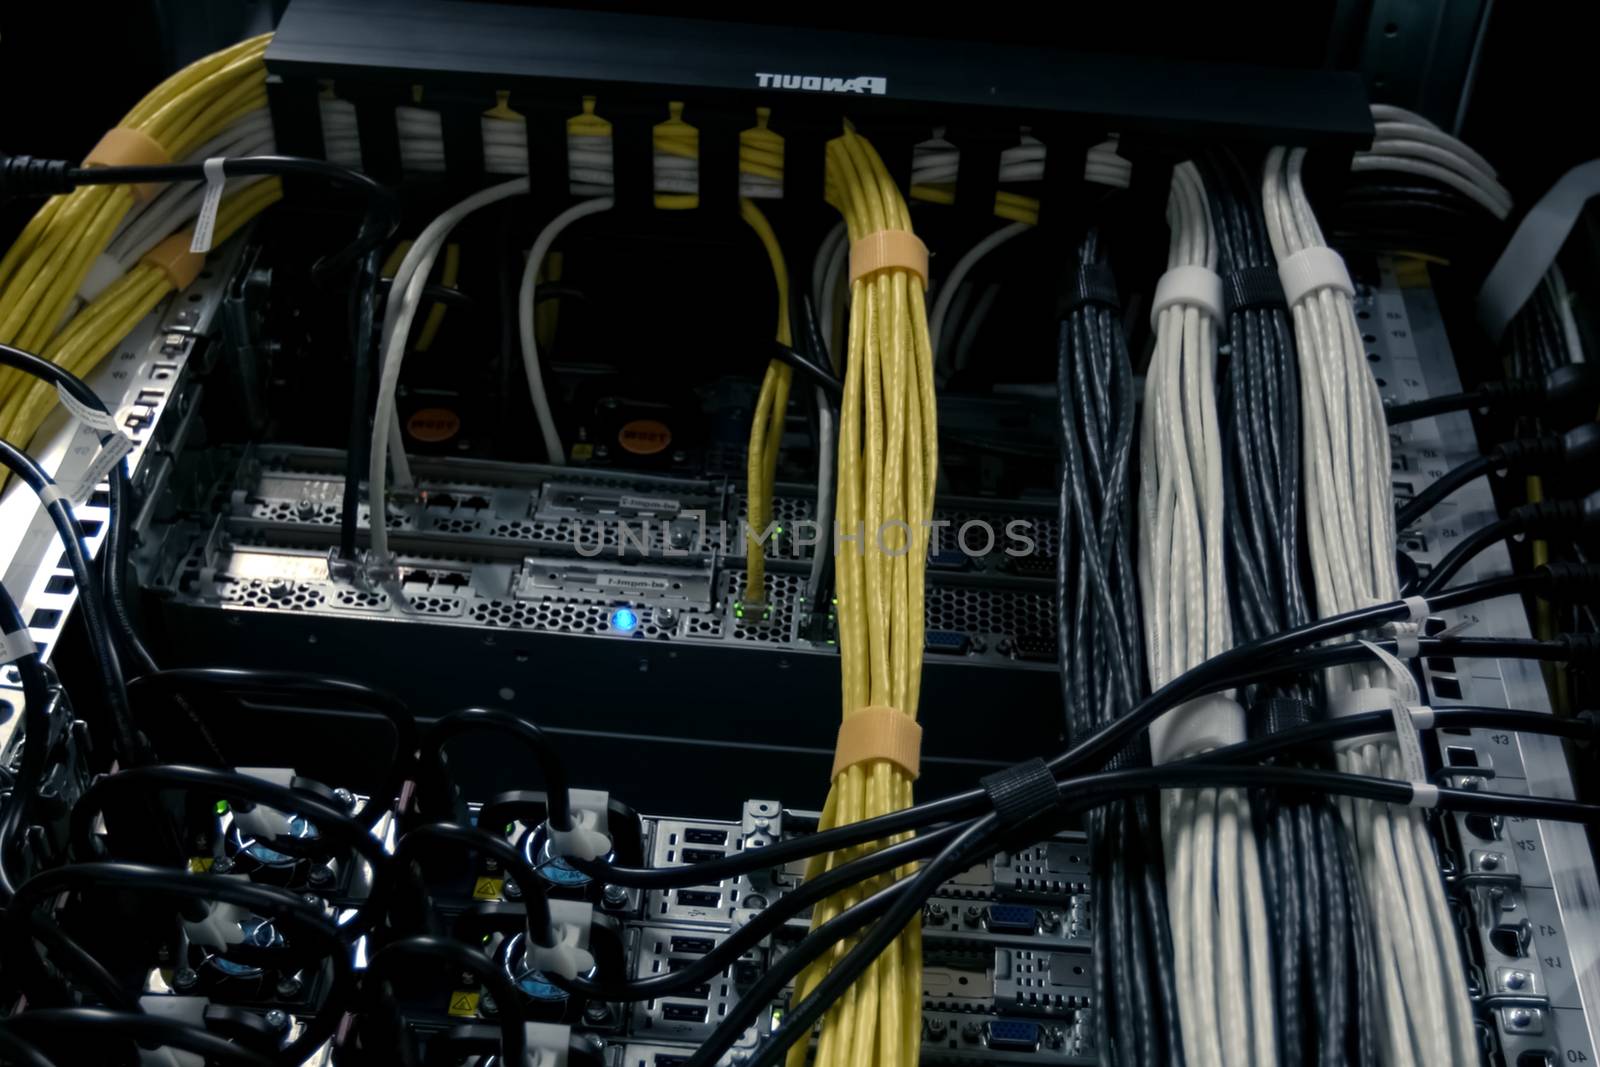 Connections of Internet cables with servers. Server date centers by nyrok